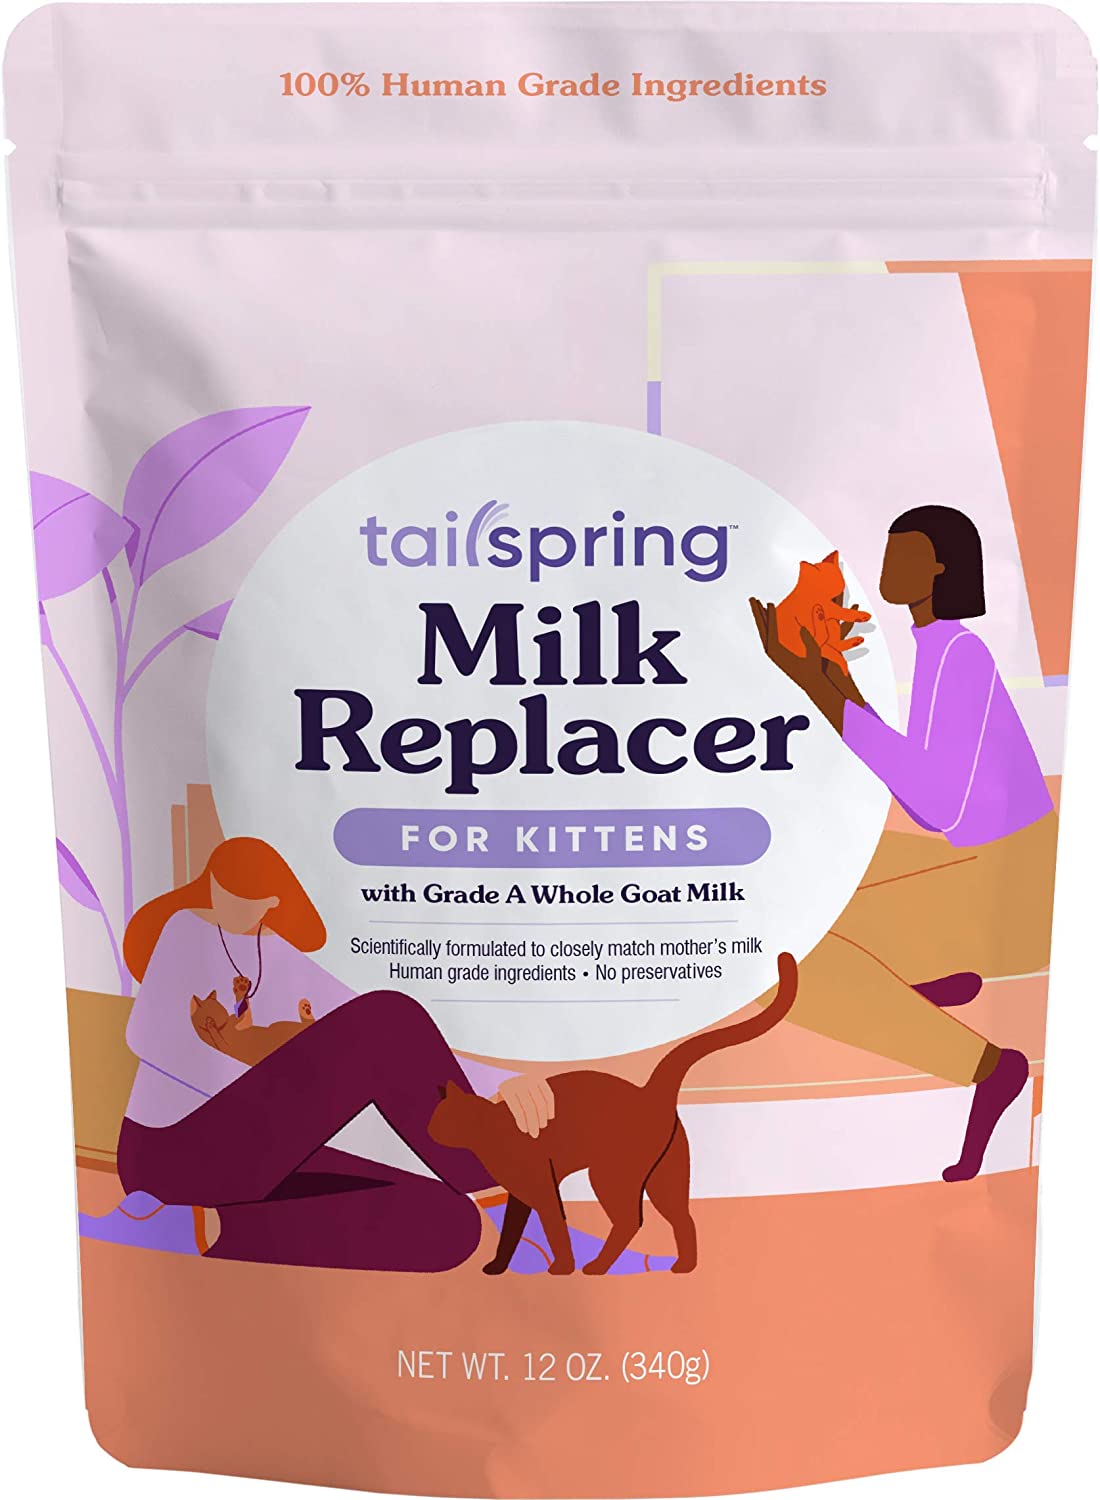 12oz Tail Spring Milk Replacer for Kittens